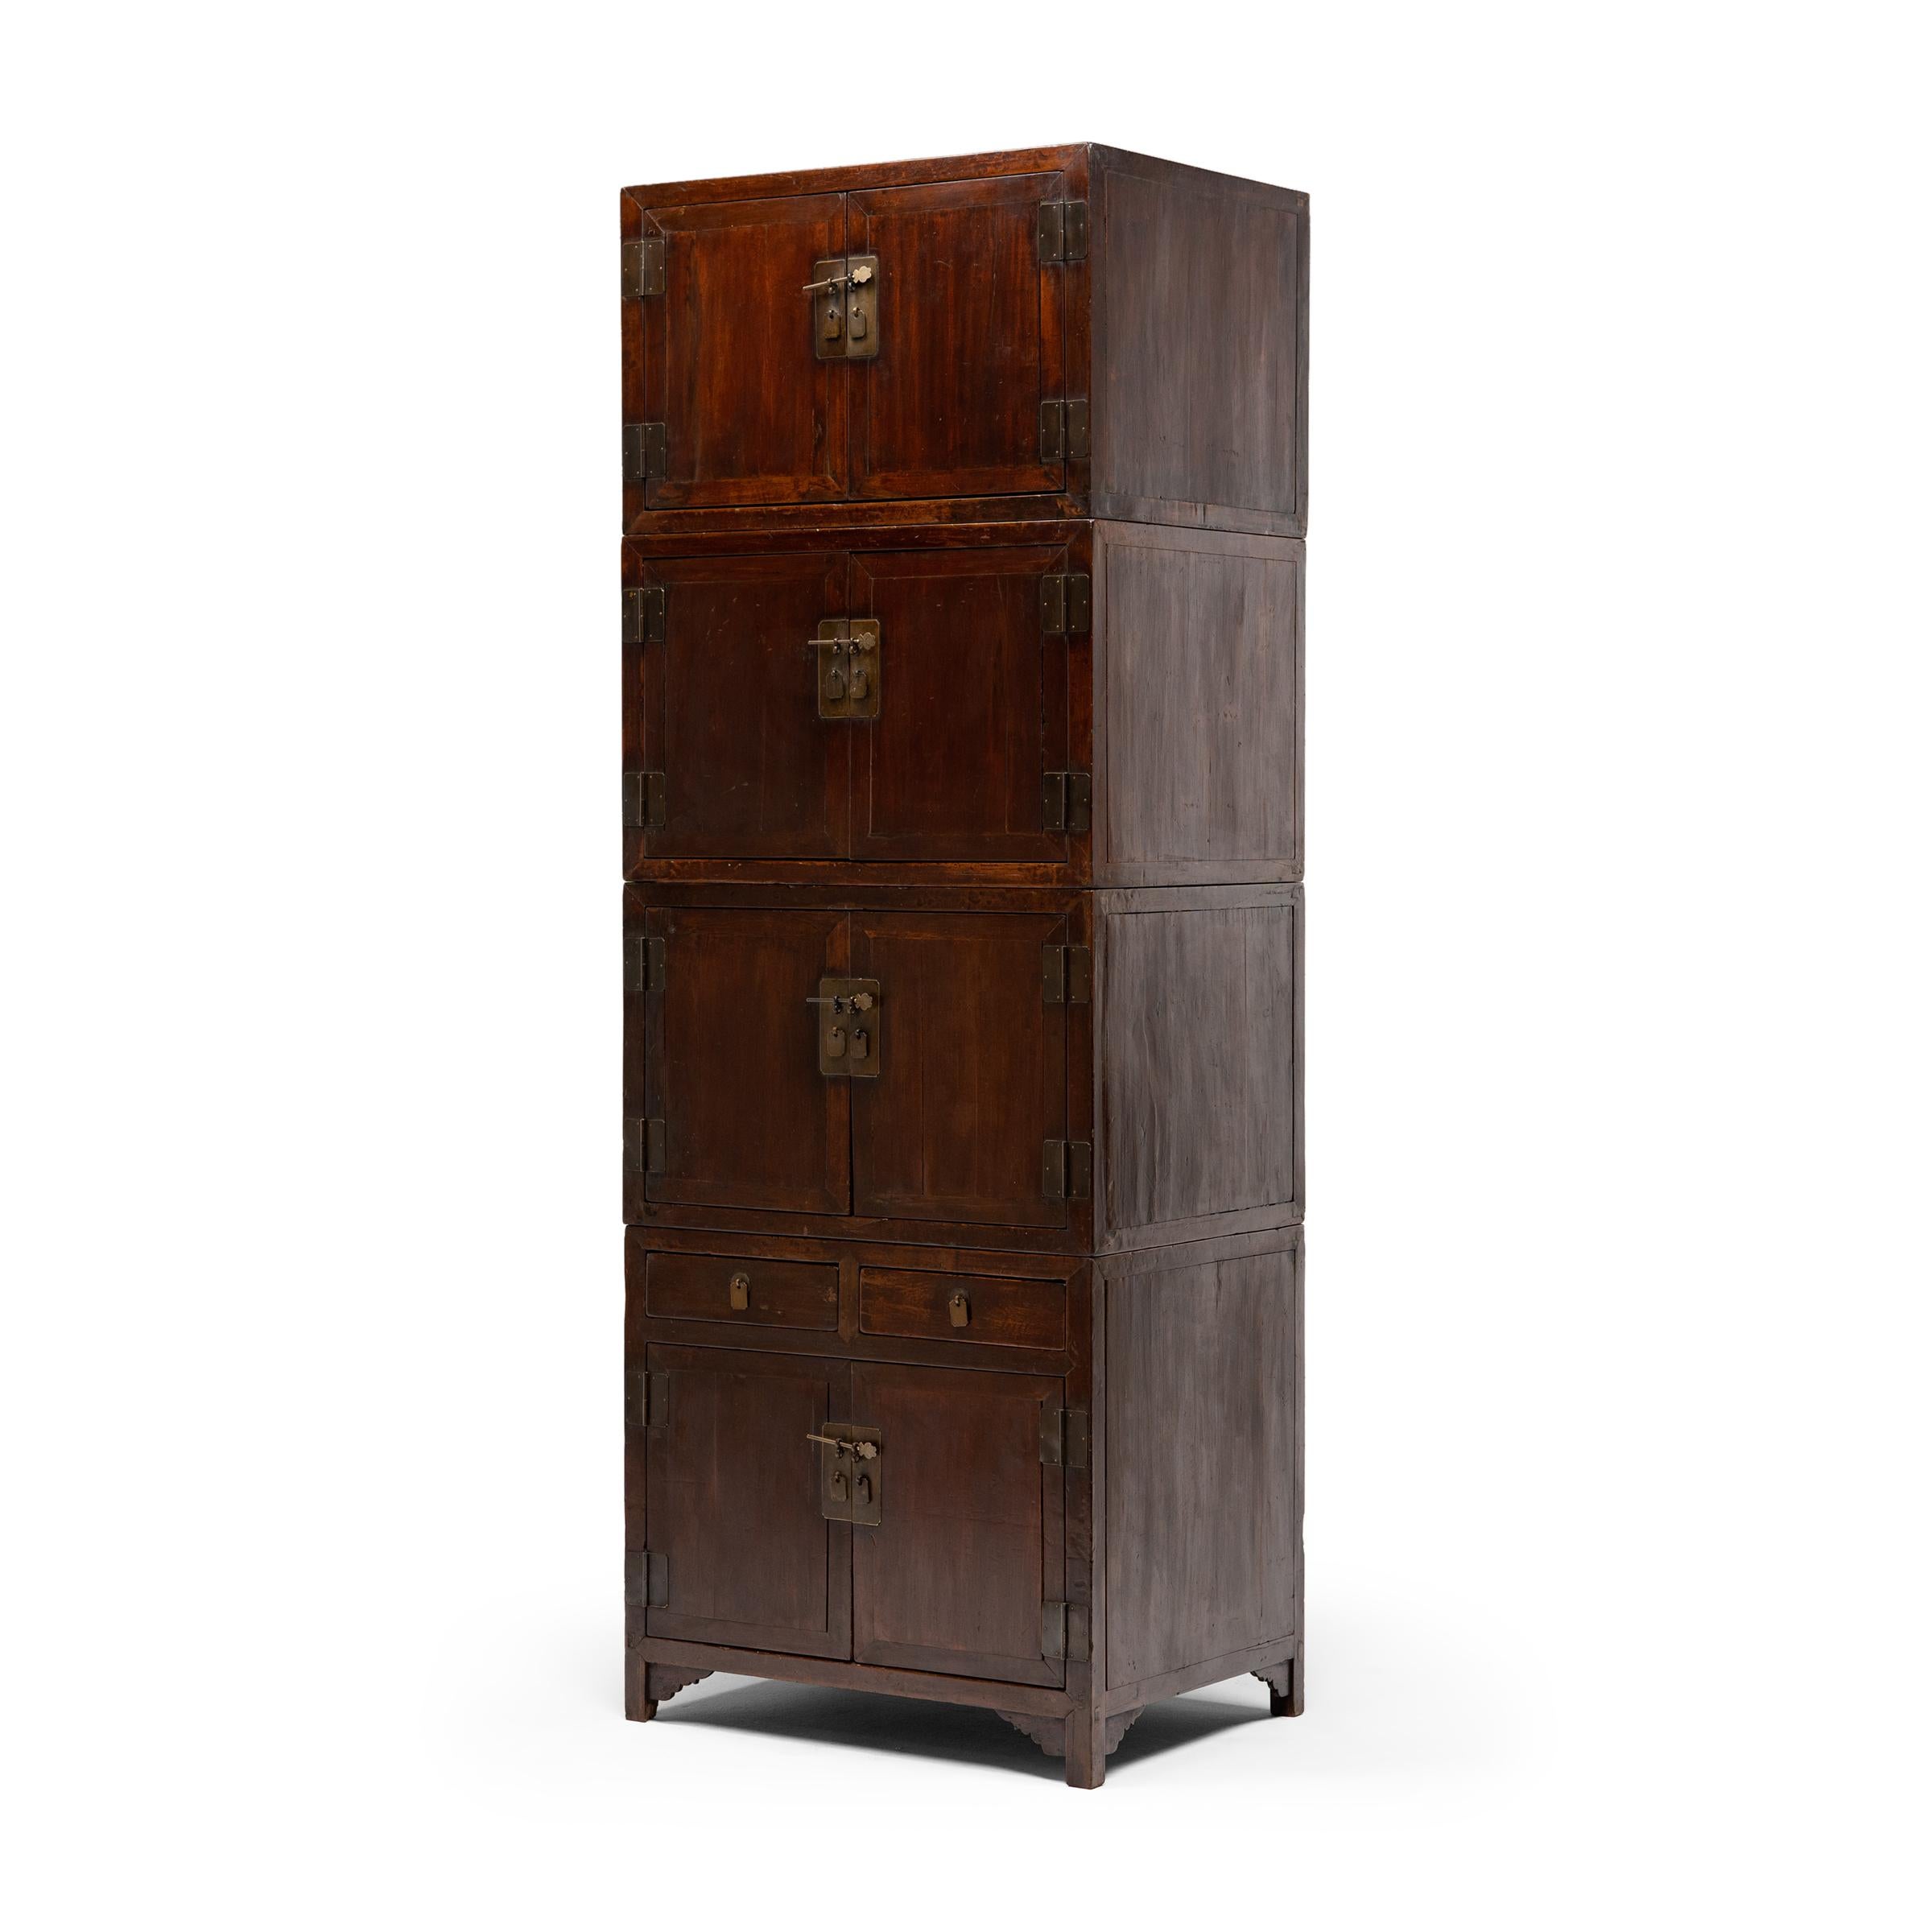 This refined, early 20th century stacking cabinet from Beijing commands its surroundings with grand scale, rich materials, and a timeless modular design. Constructed of northern elm (yumu) with traditional joinery, the cabinet is comprised of four